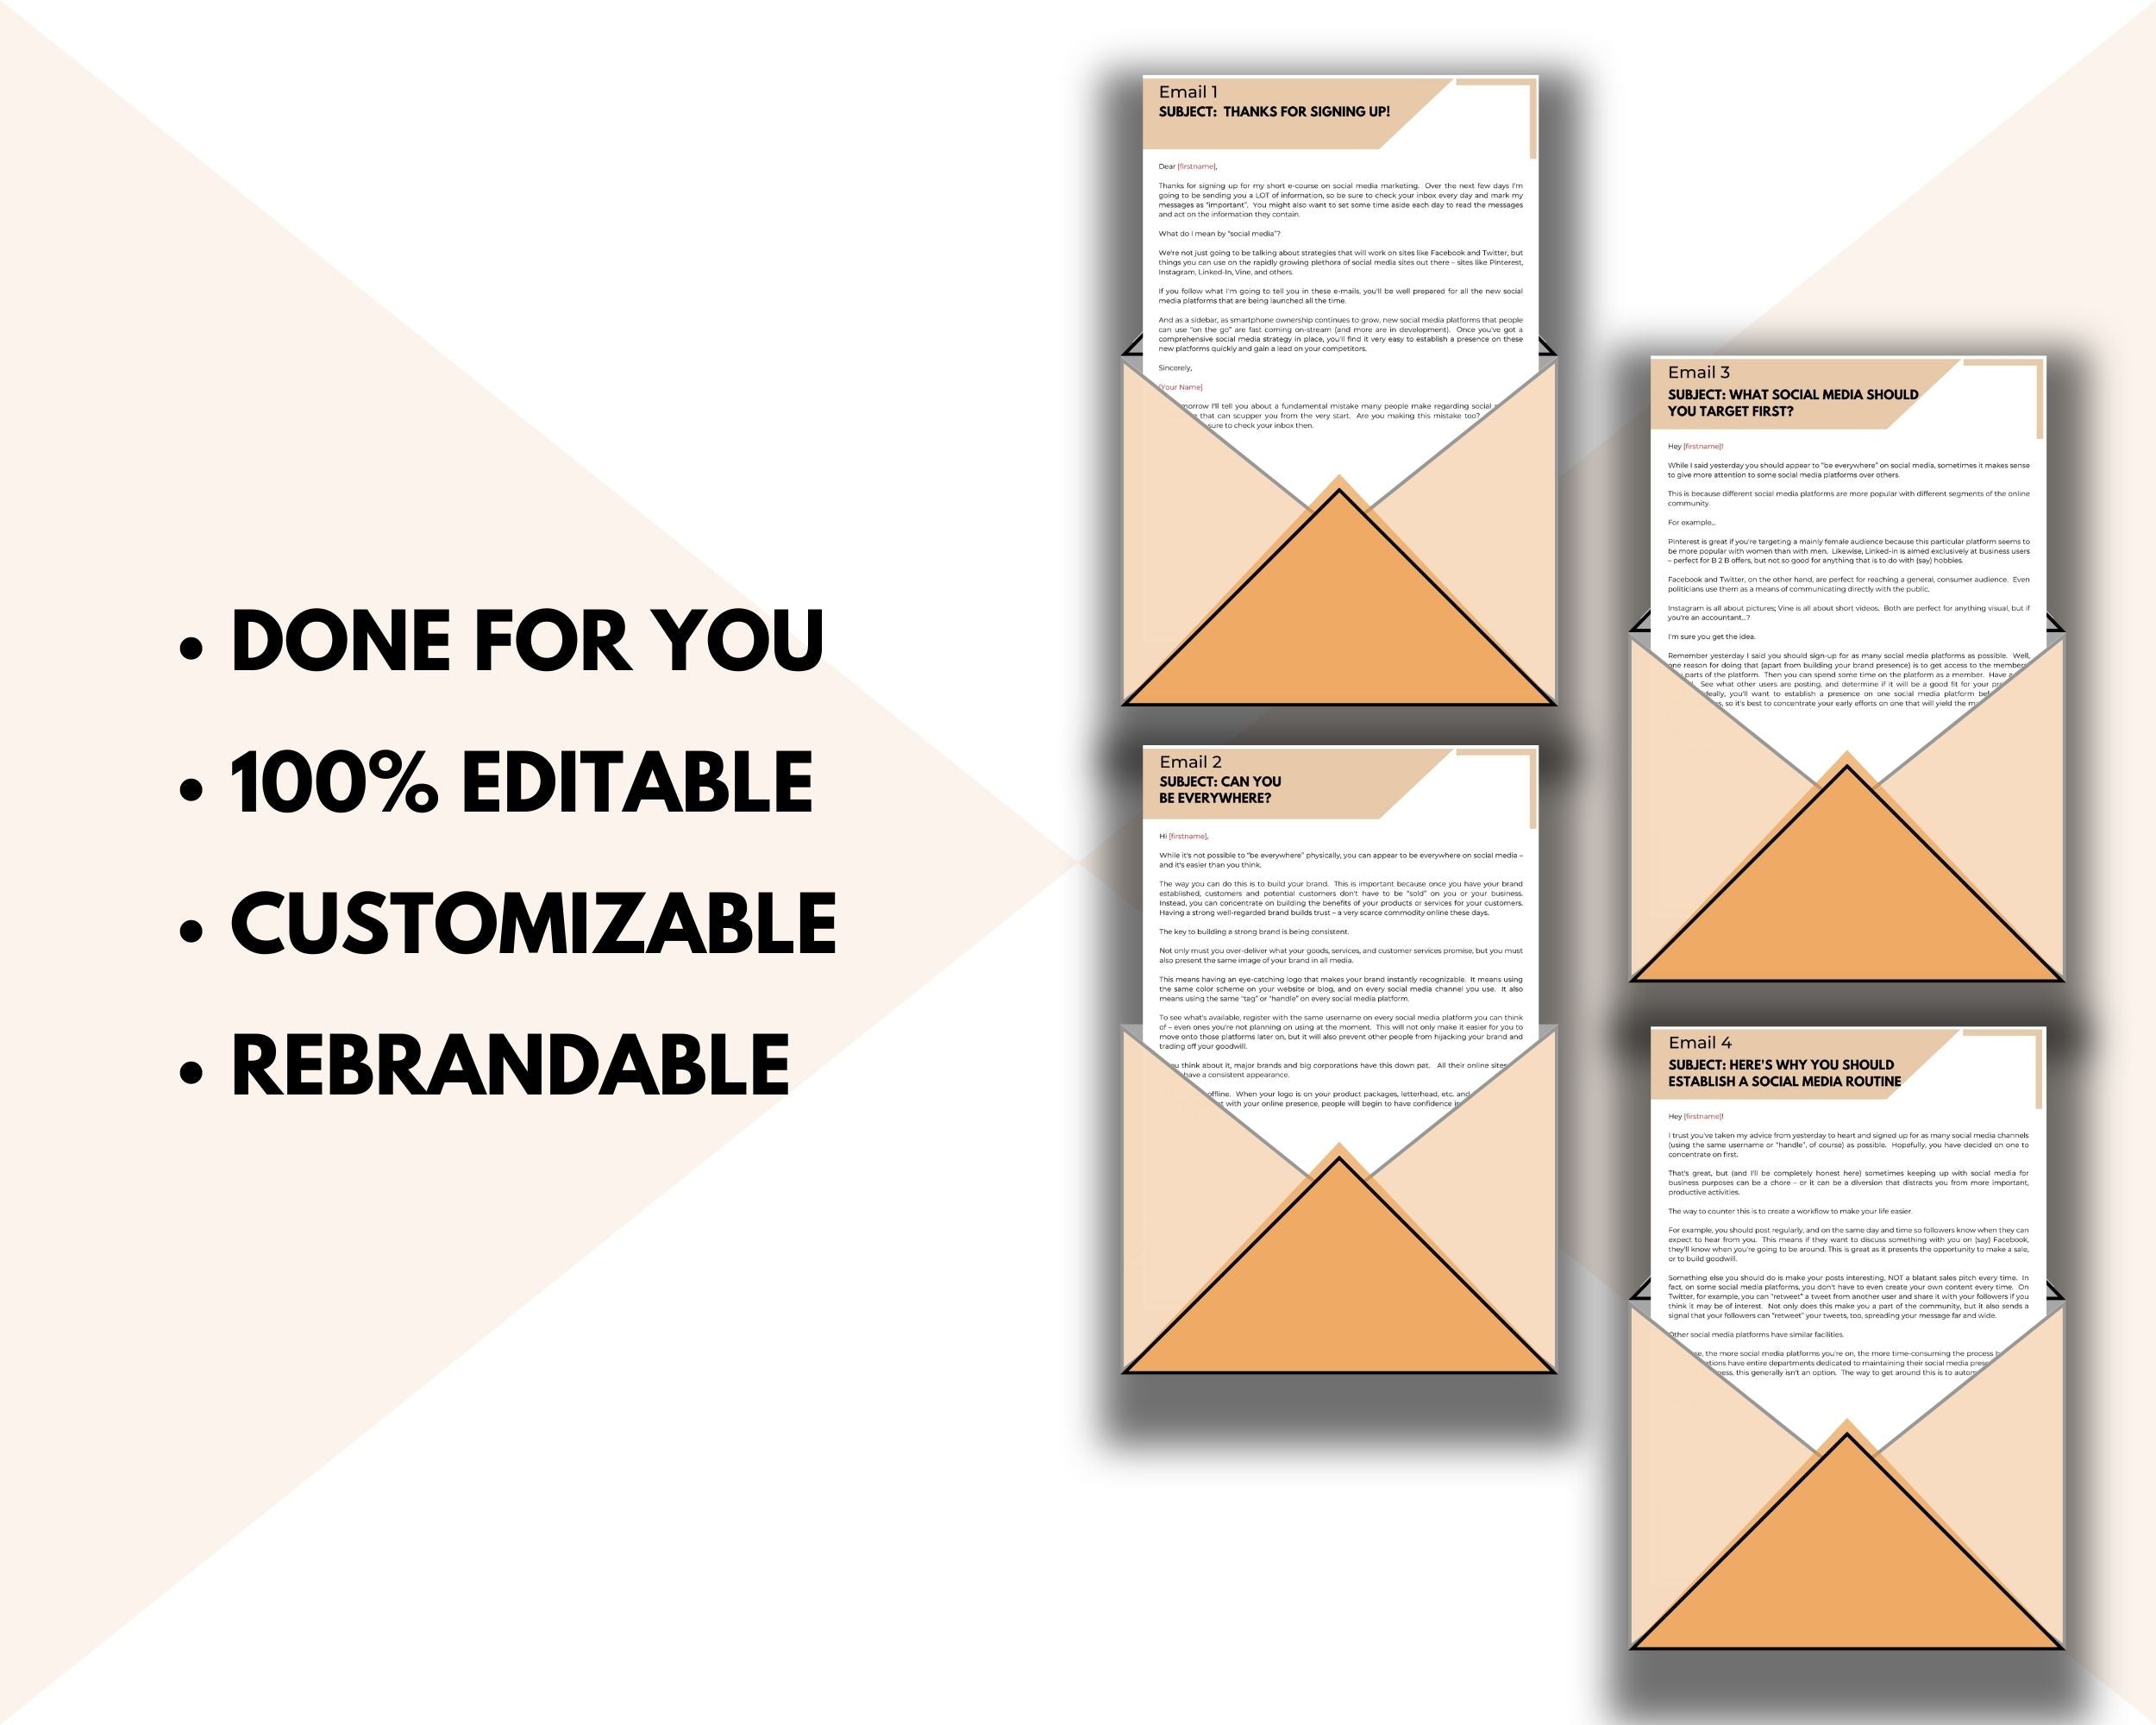 Editable Social Success Emails | Done-for-You eCourse